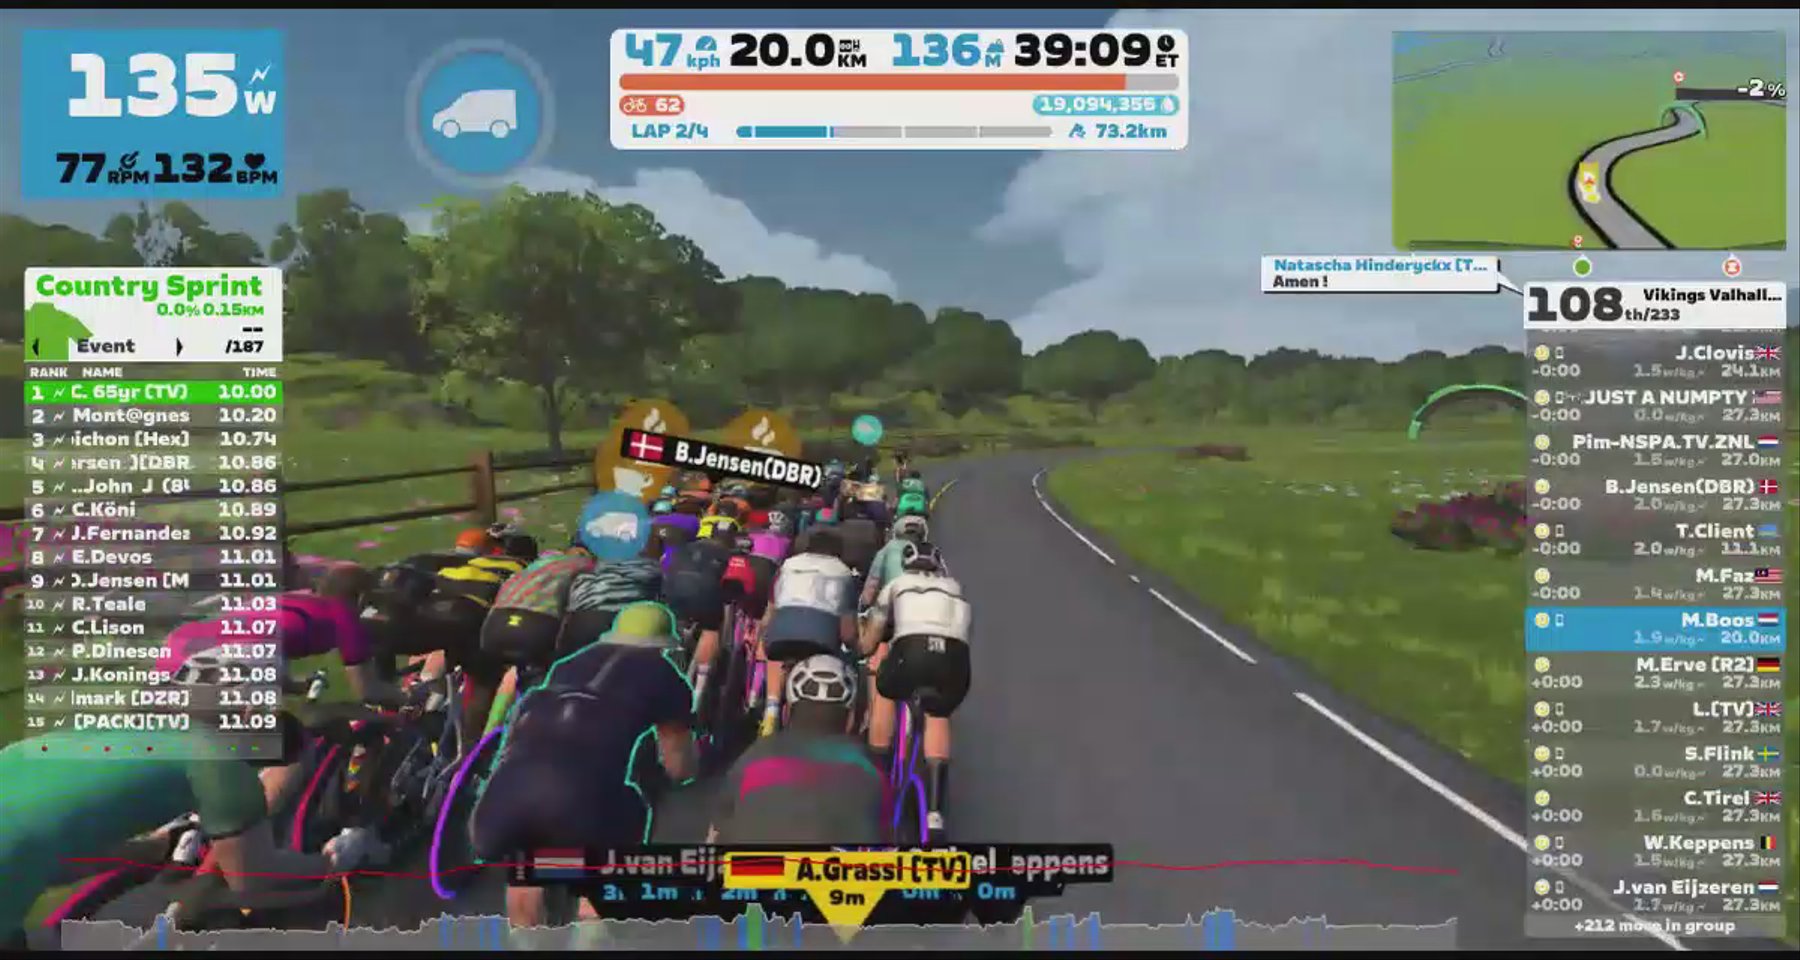 Zwift - Group Ride: Vikings Valhalla Sunday Skaal ride (D) on Wandering Flats in Makuri Islands